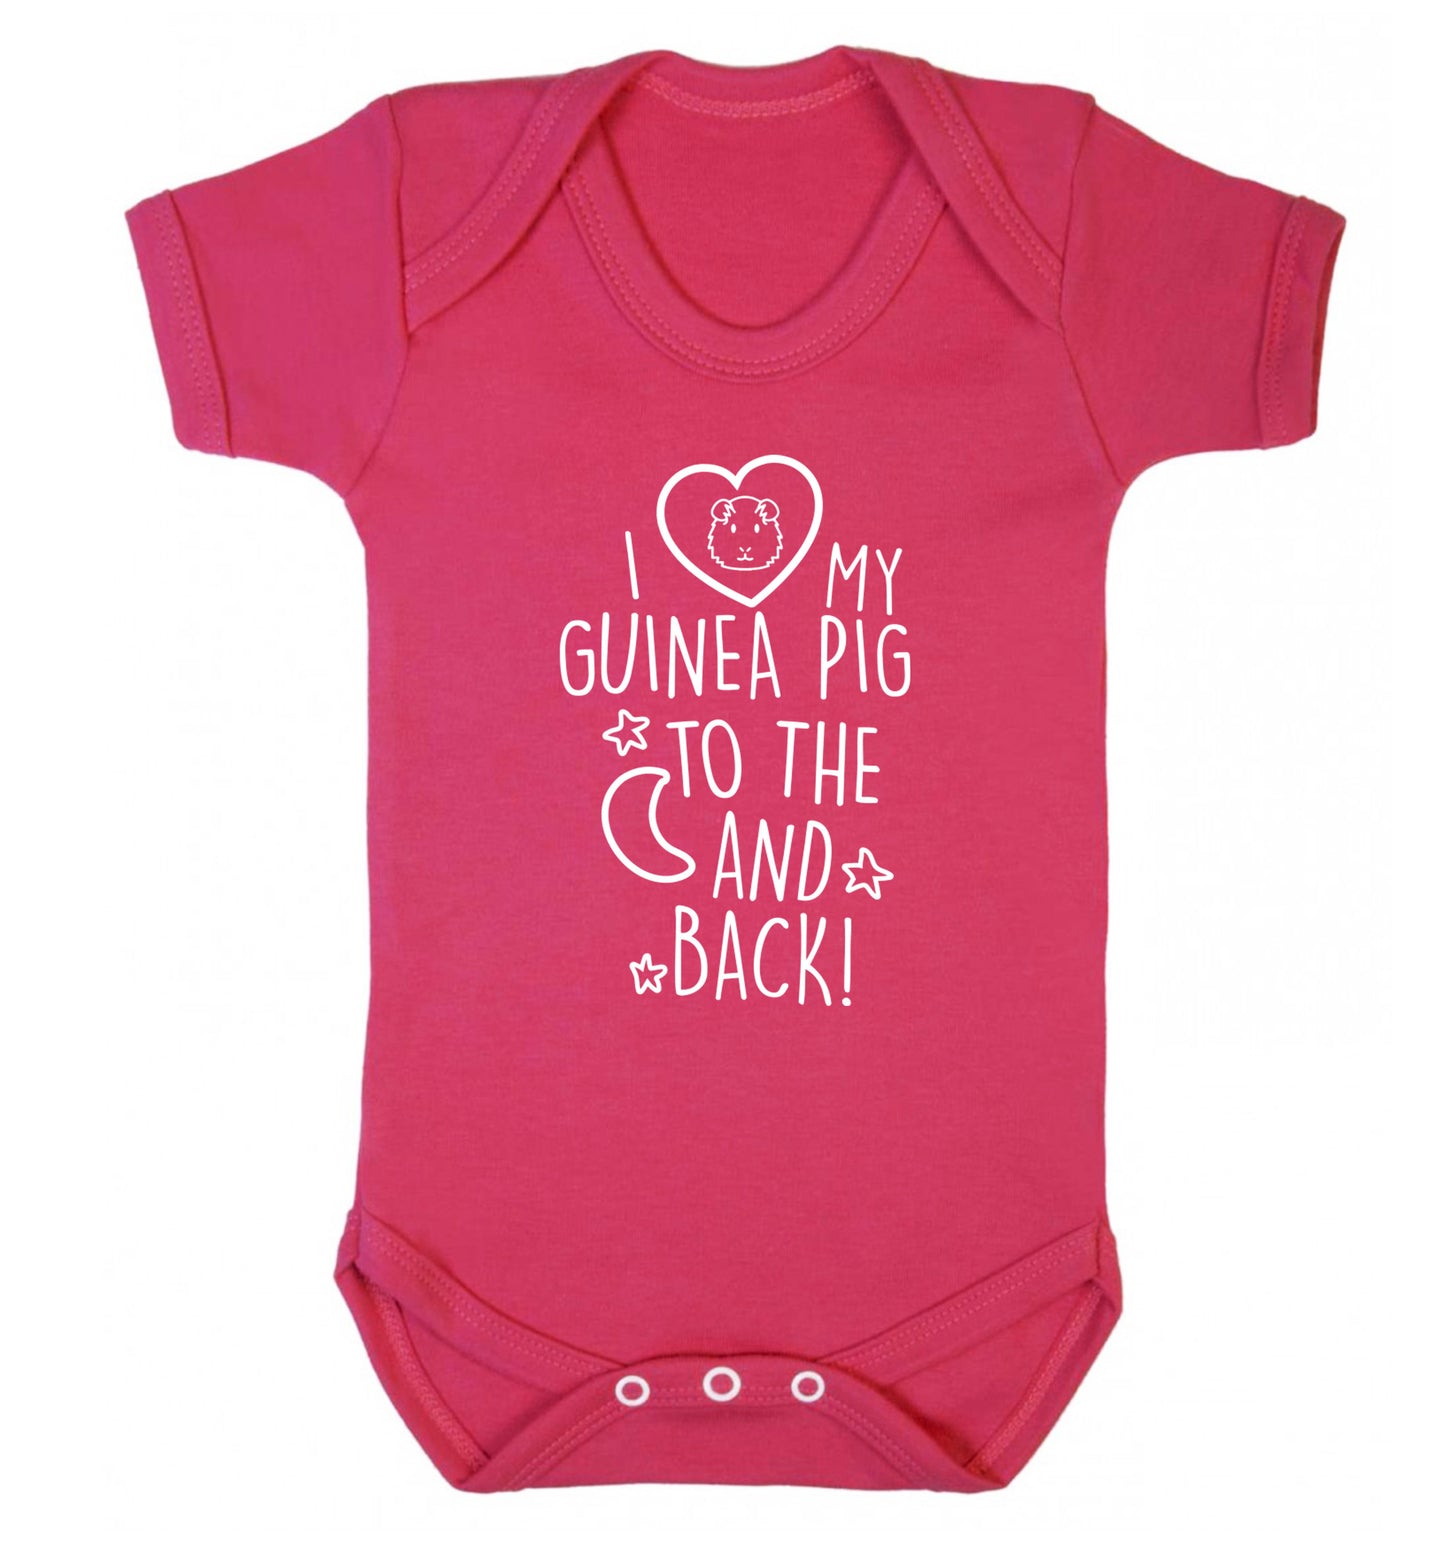 I love my guinea pig to the moon and back Baby Vest dark pink 18-24 months